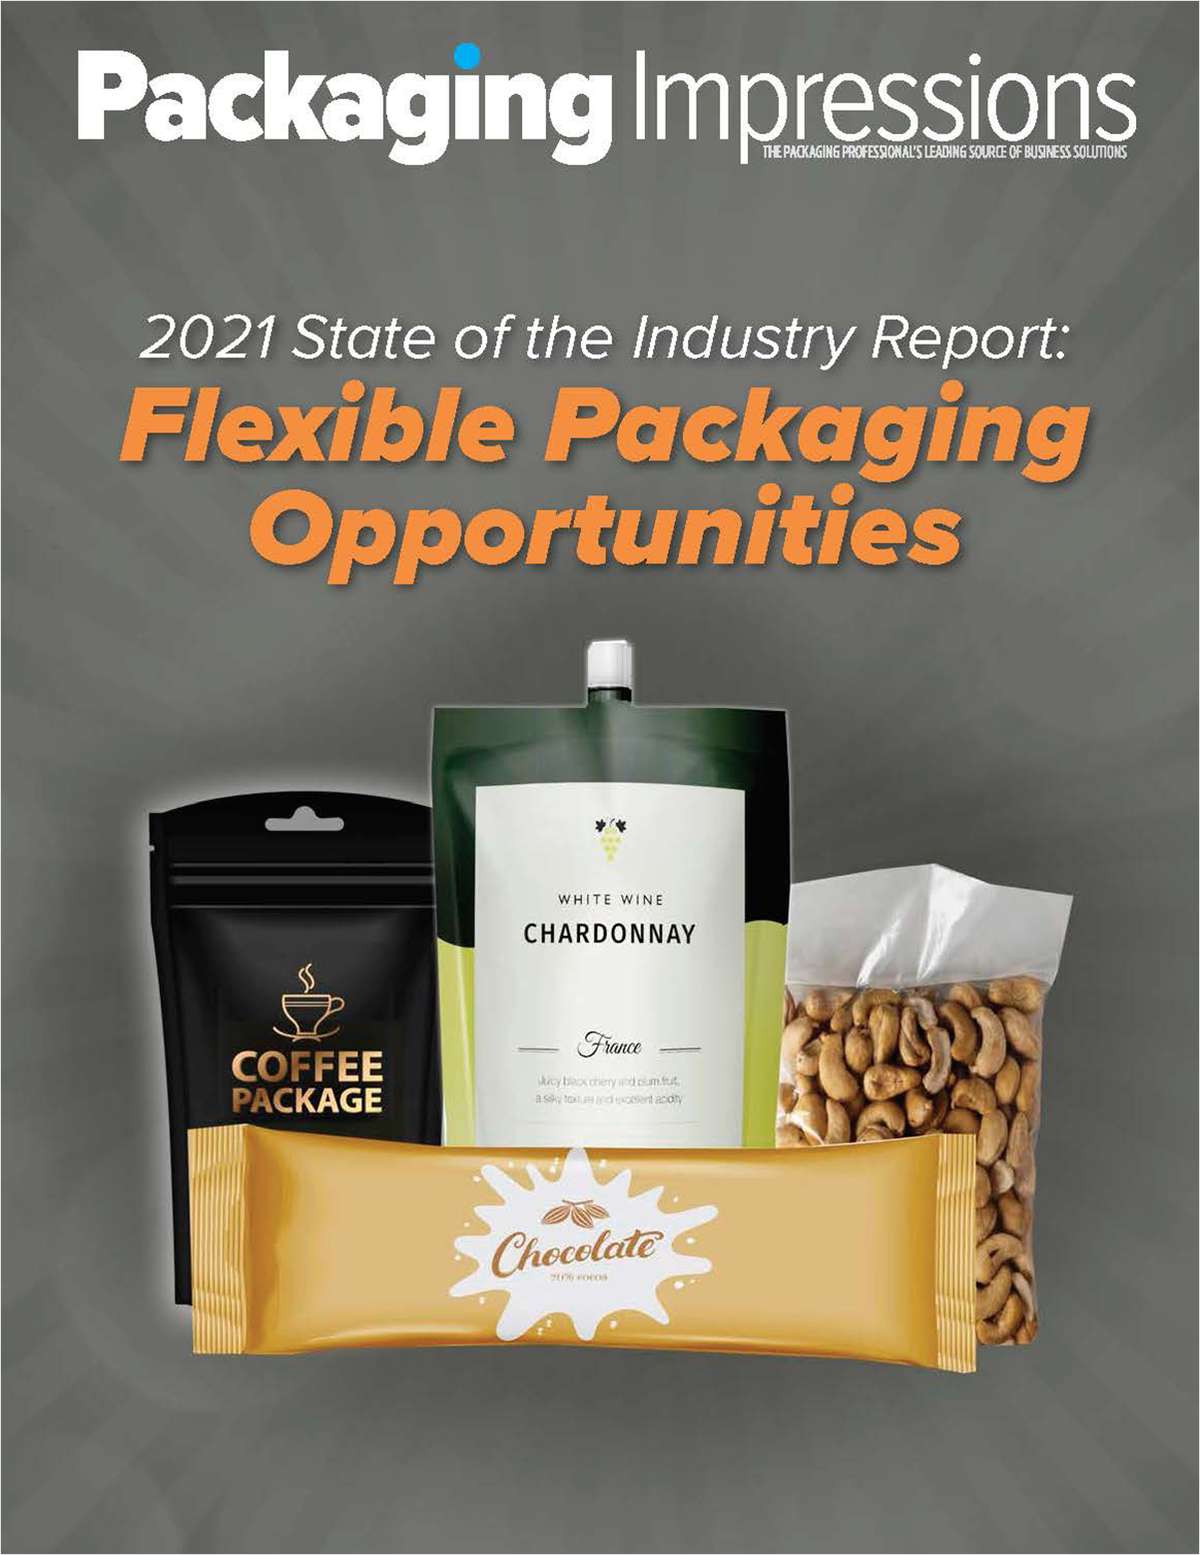 2021 State of the Industry Report: Flexible Packaging Opportunities